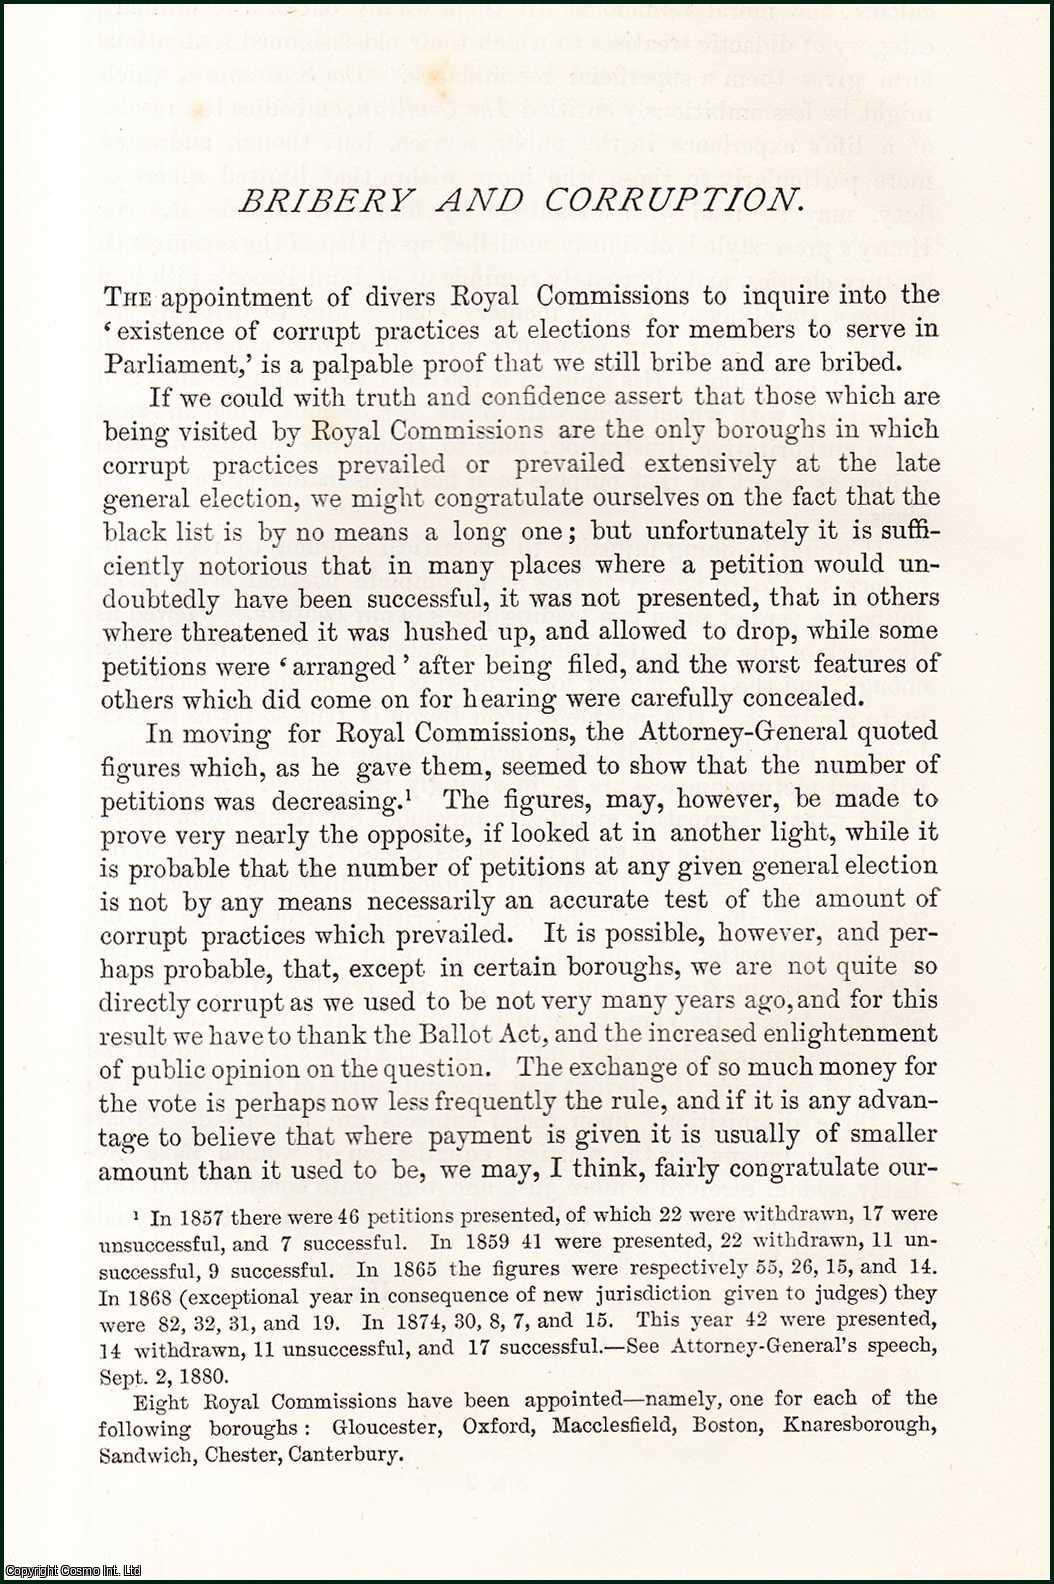 Sydney C. Buxton - Bribery and Corruption. The Royal Commission's appointment to investigate possible corrupt electoral practices for Parliamentary representation. An original article from the Nineteenth Century Magazine, 1880.